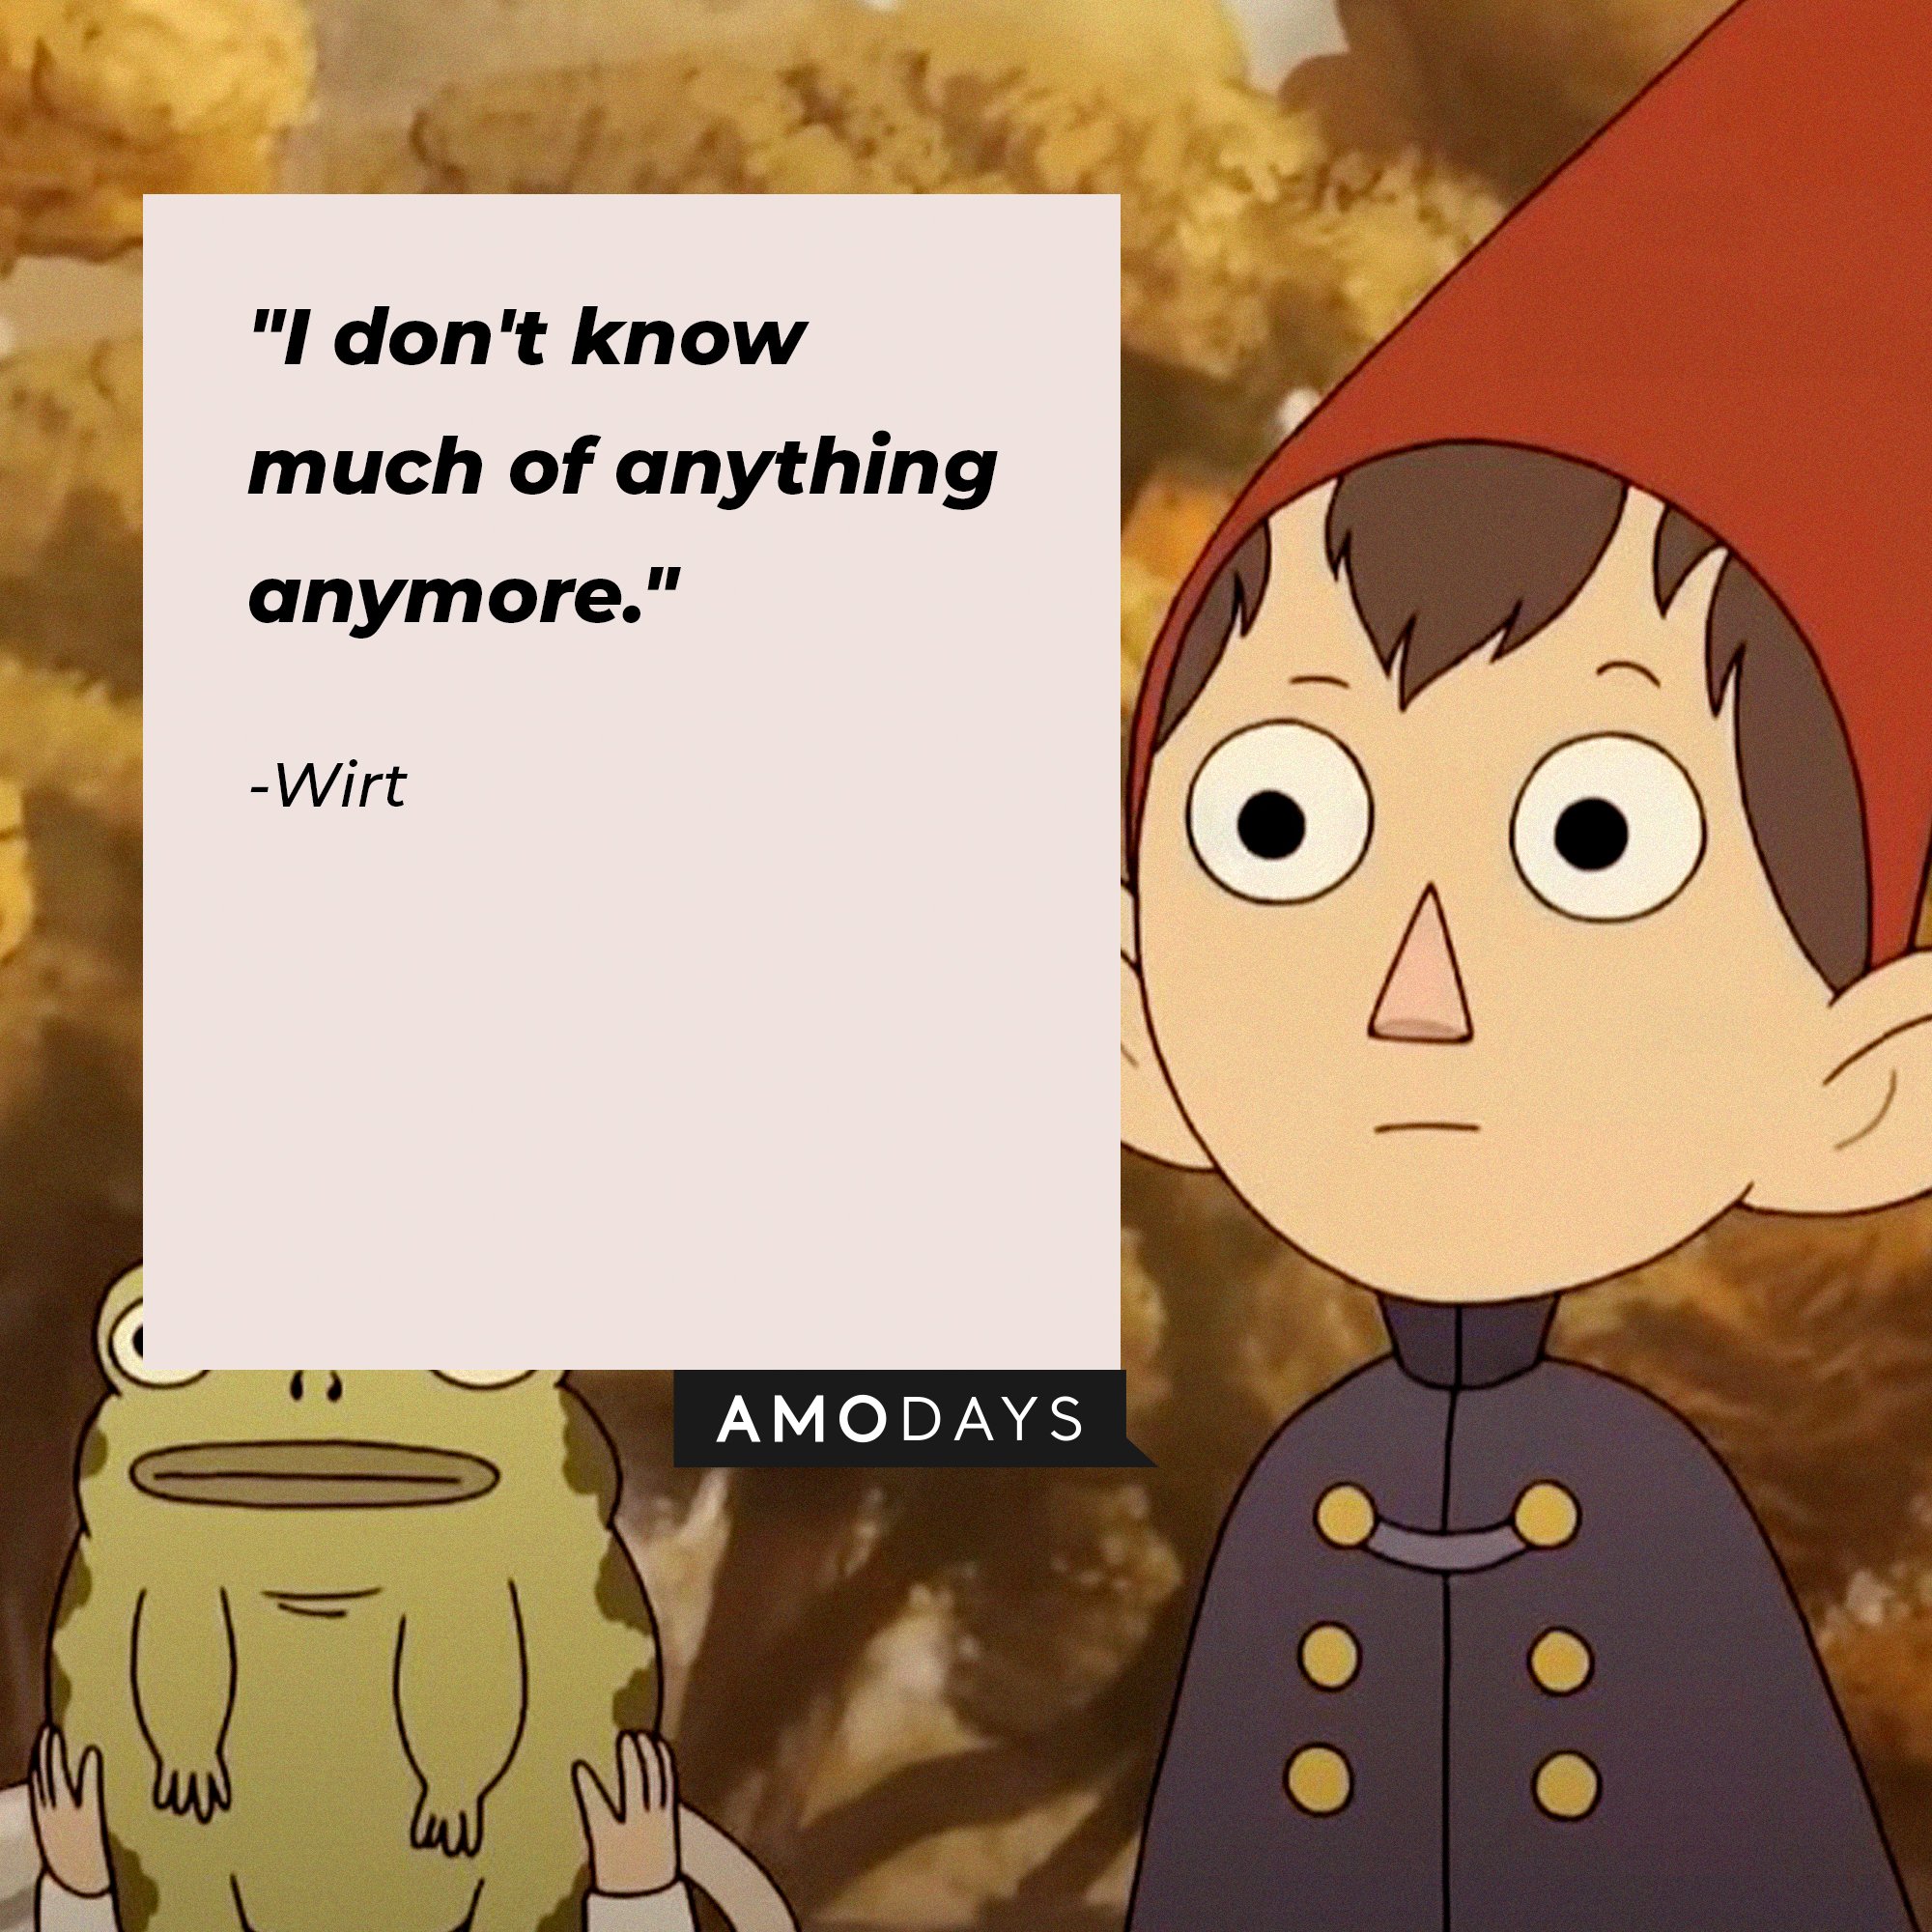 Wirt’s quote: "I don't know much of anything anymore." | Image: AmoDays